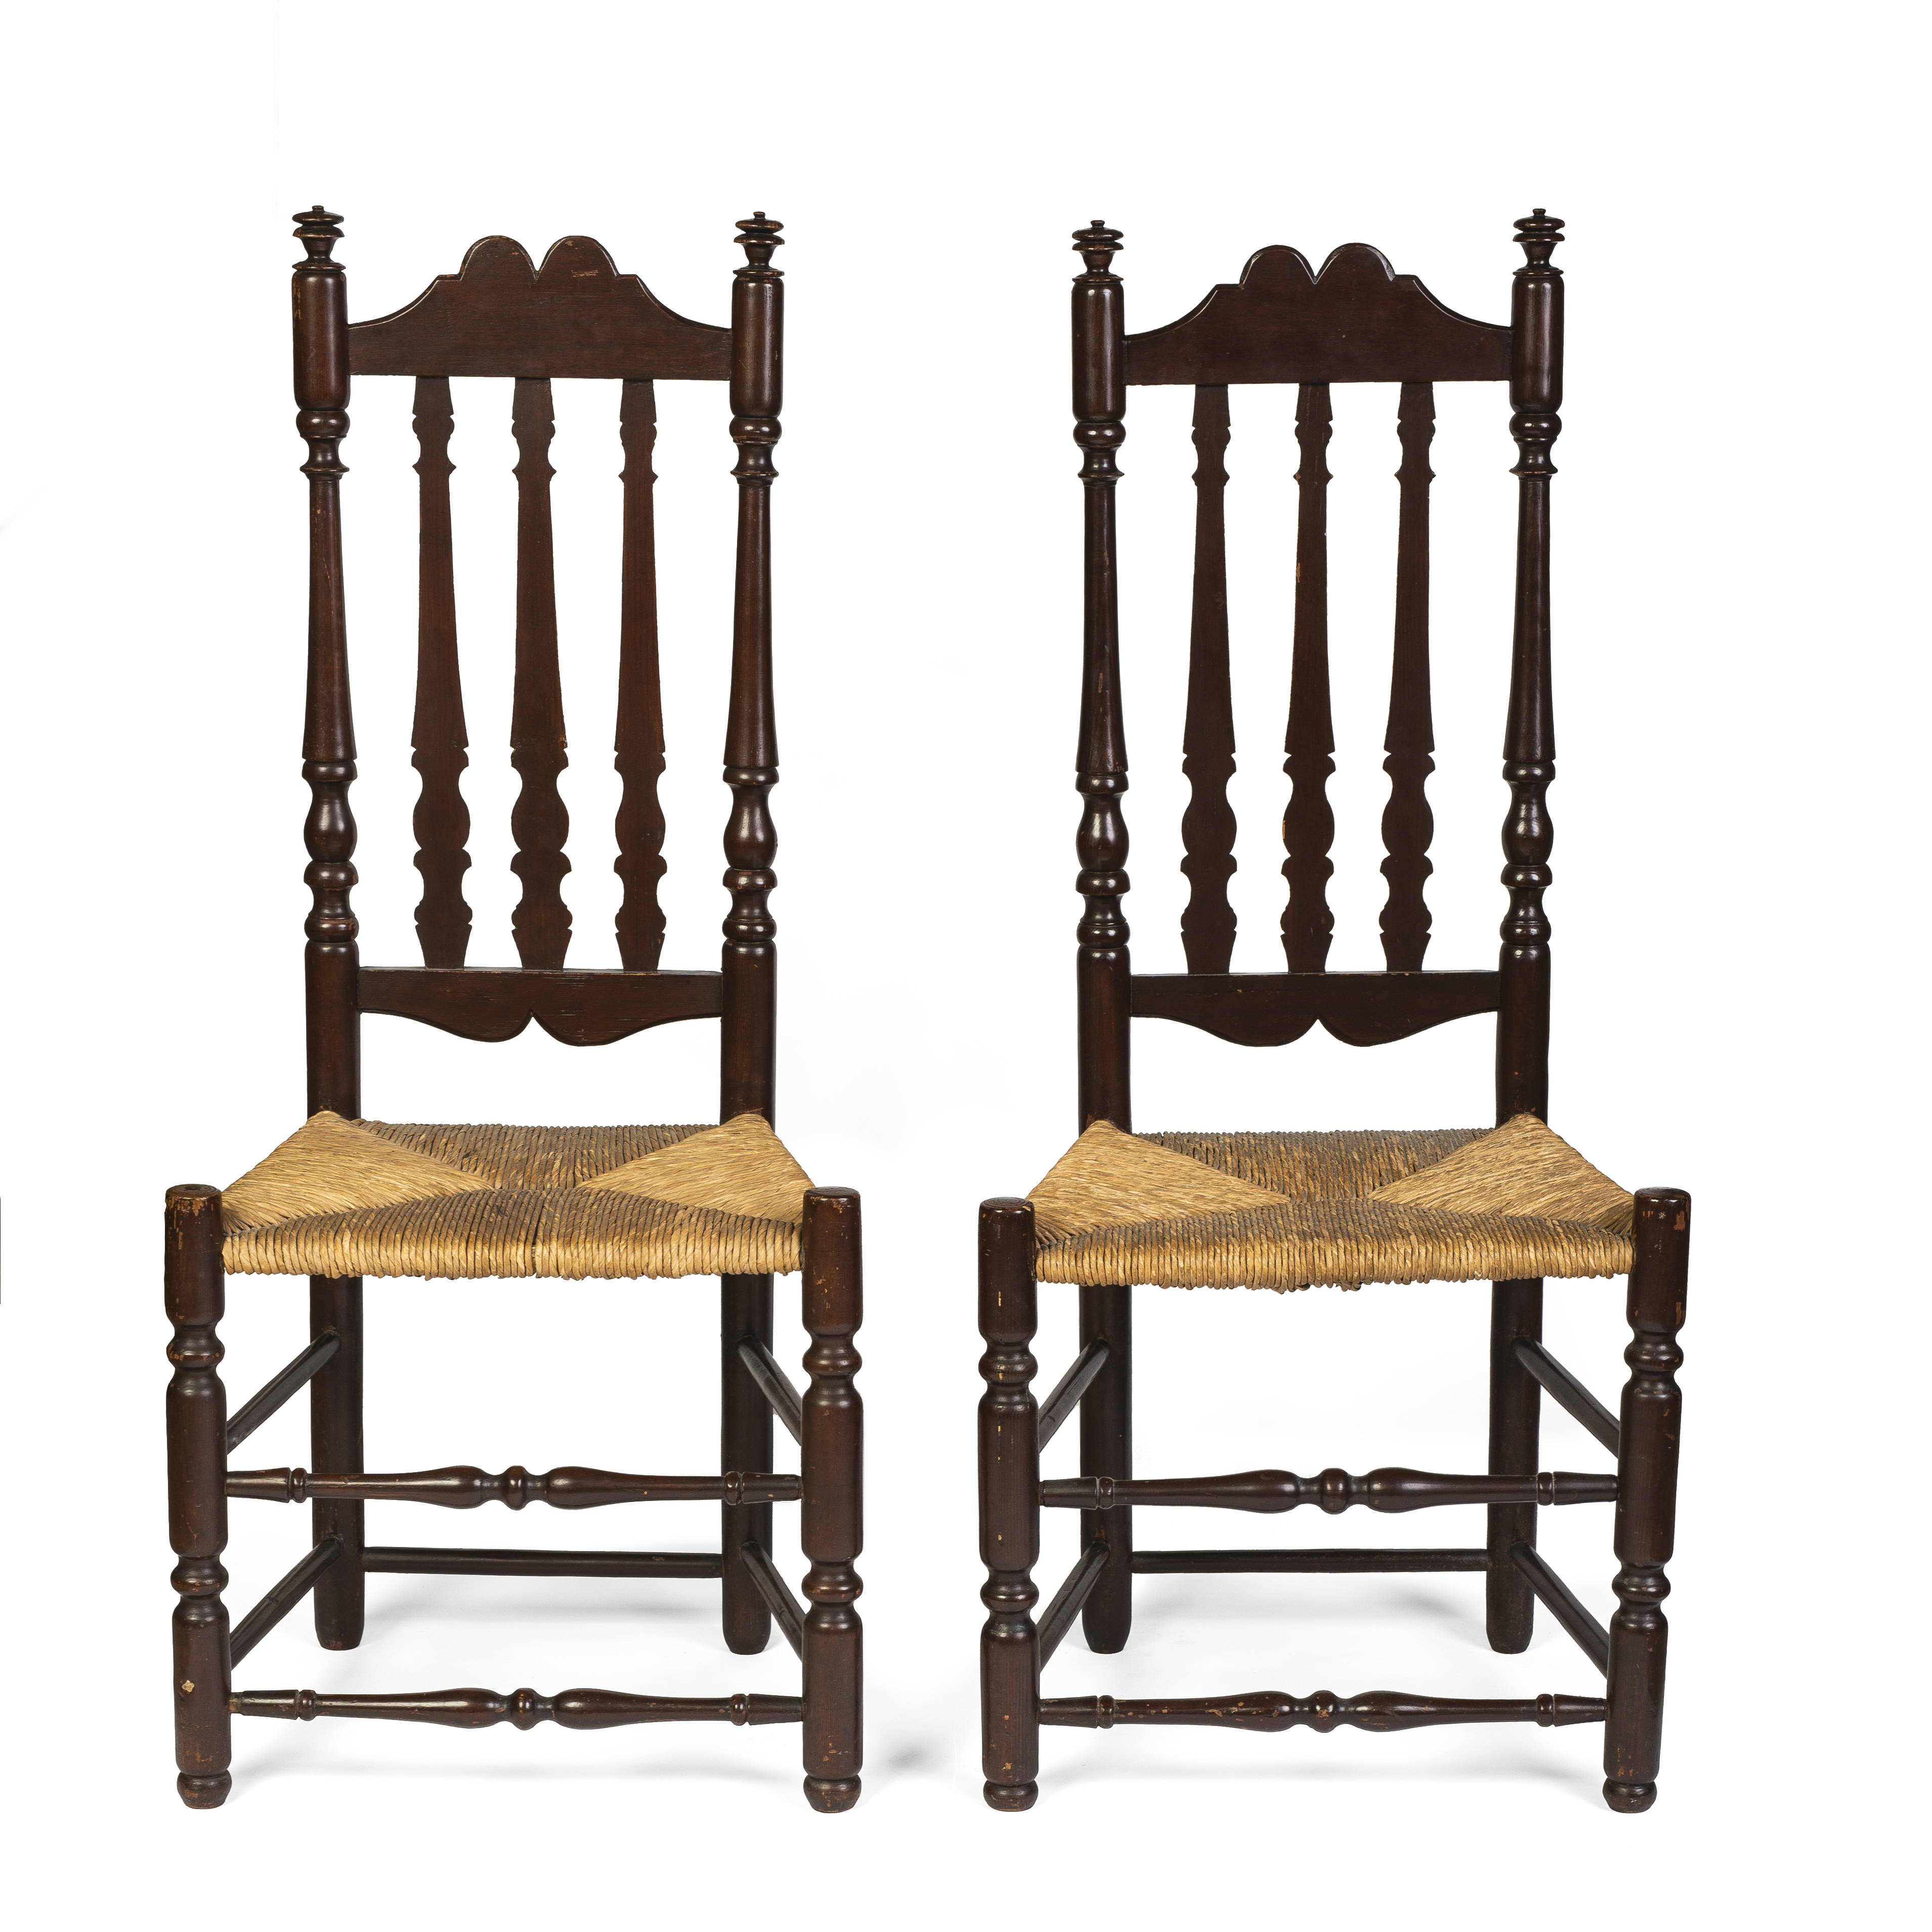 A fine pair of banister-backed side chairs